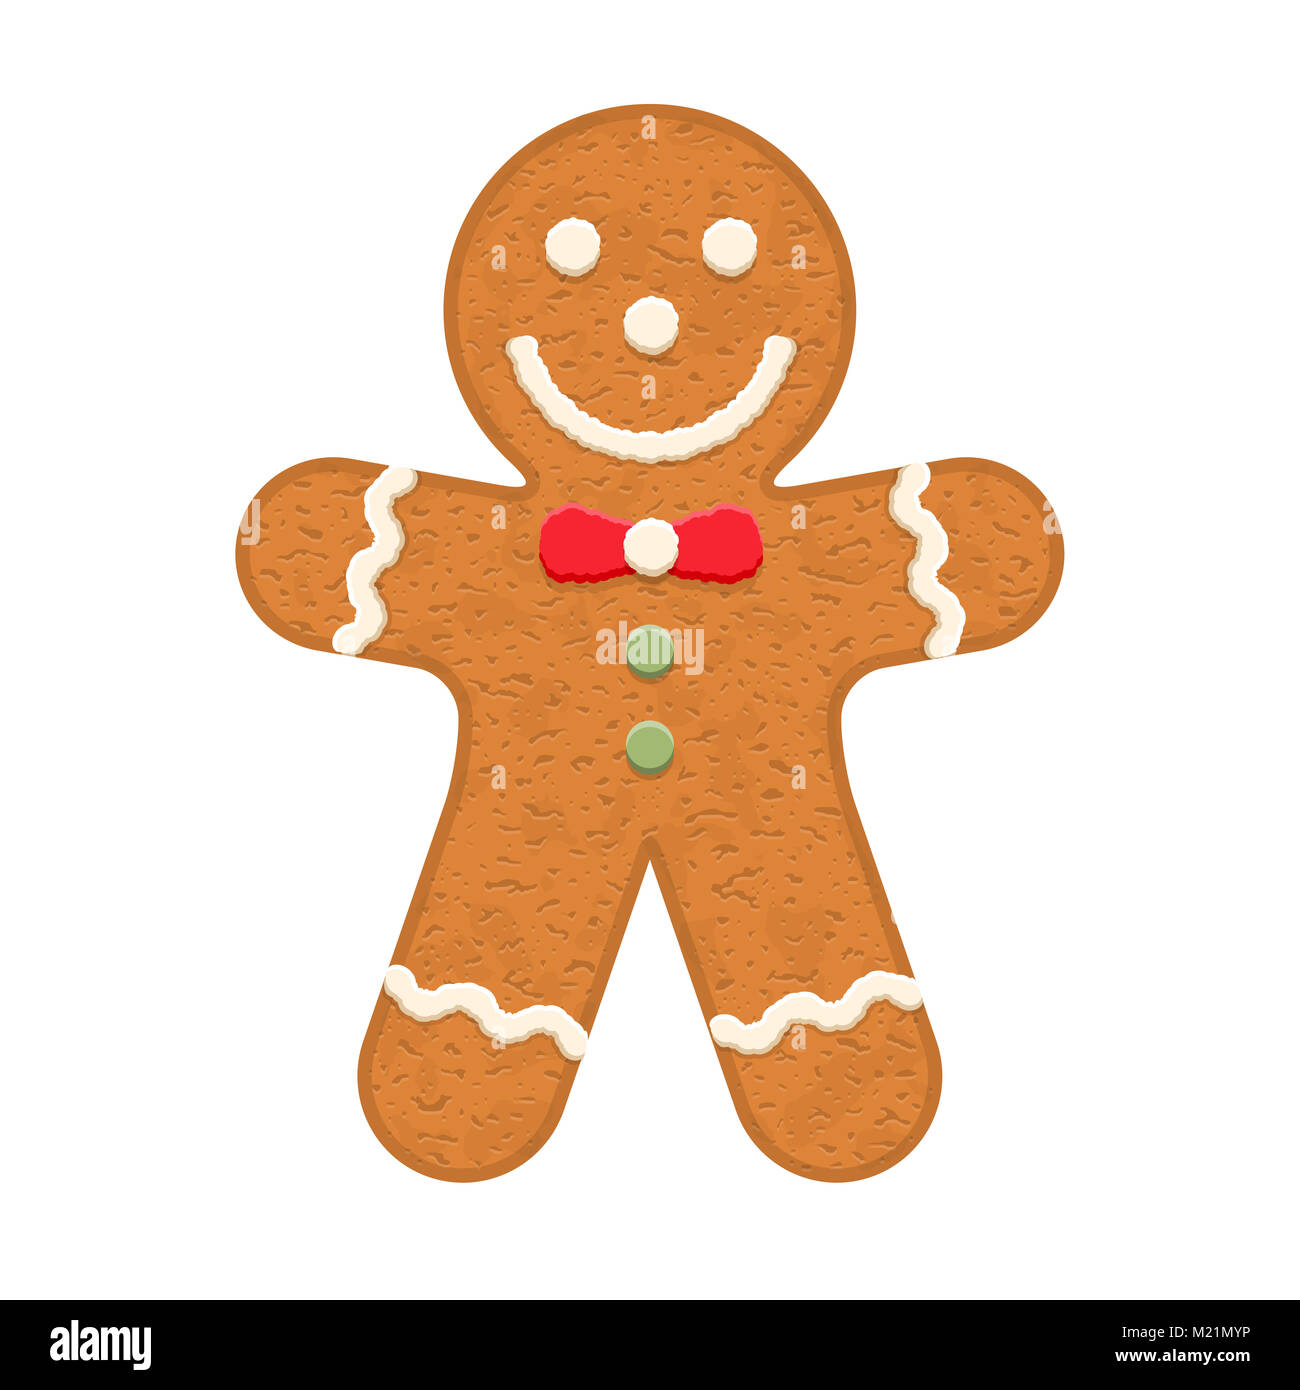 Gingerbread man, traditional Christmas cookie, vector eps10 illustration Stock Photo